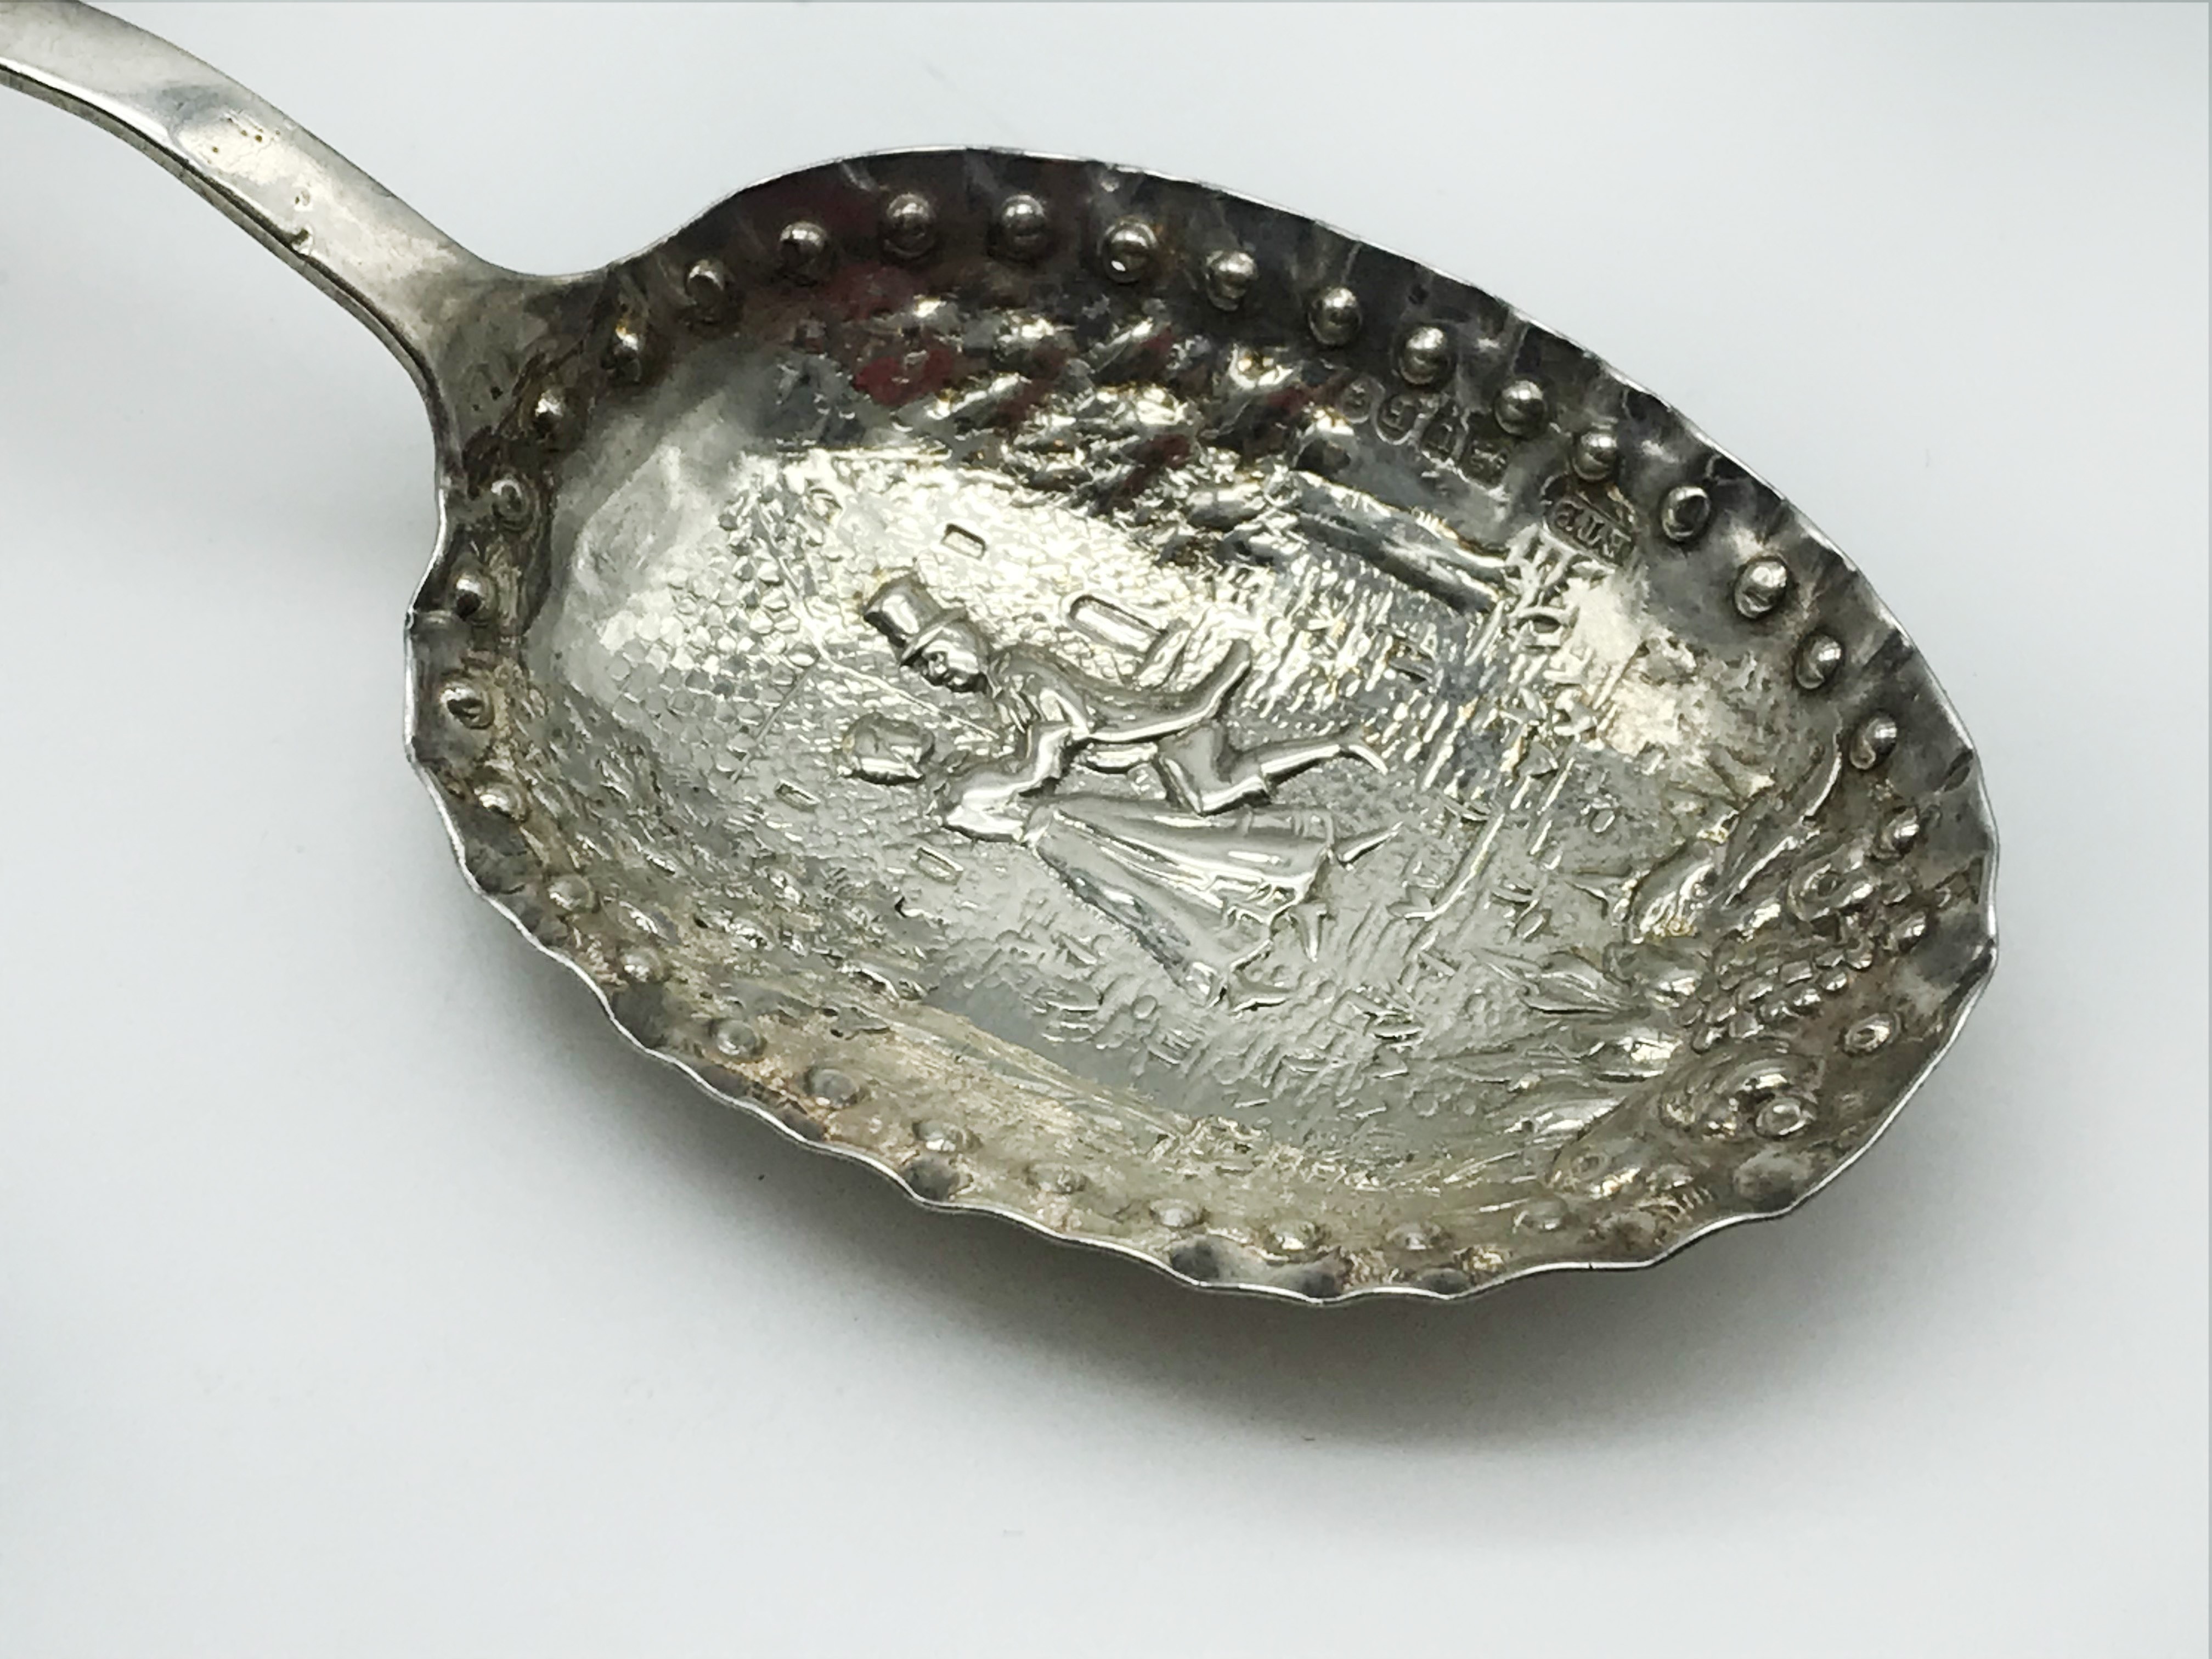 ANTIQUE SOLID SILVER DUTCH ORNATE EMBOSSED TEA CADDY SPOON WITH IMPORTED HALLMARKS - Image 3 of 7